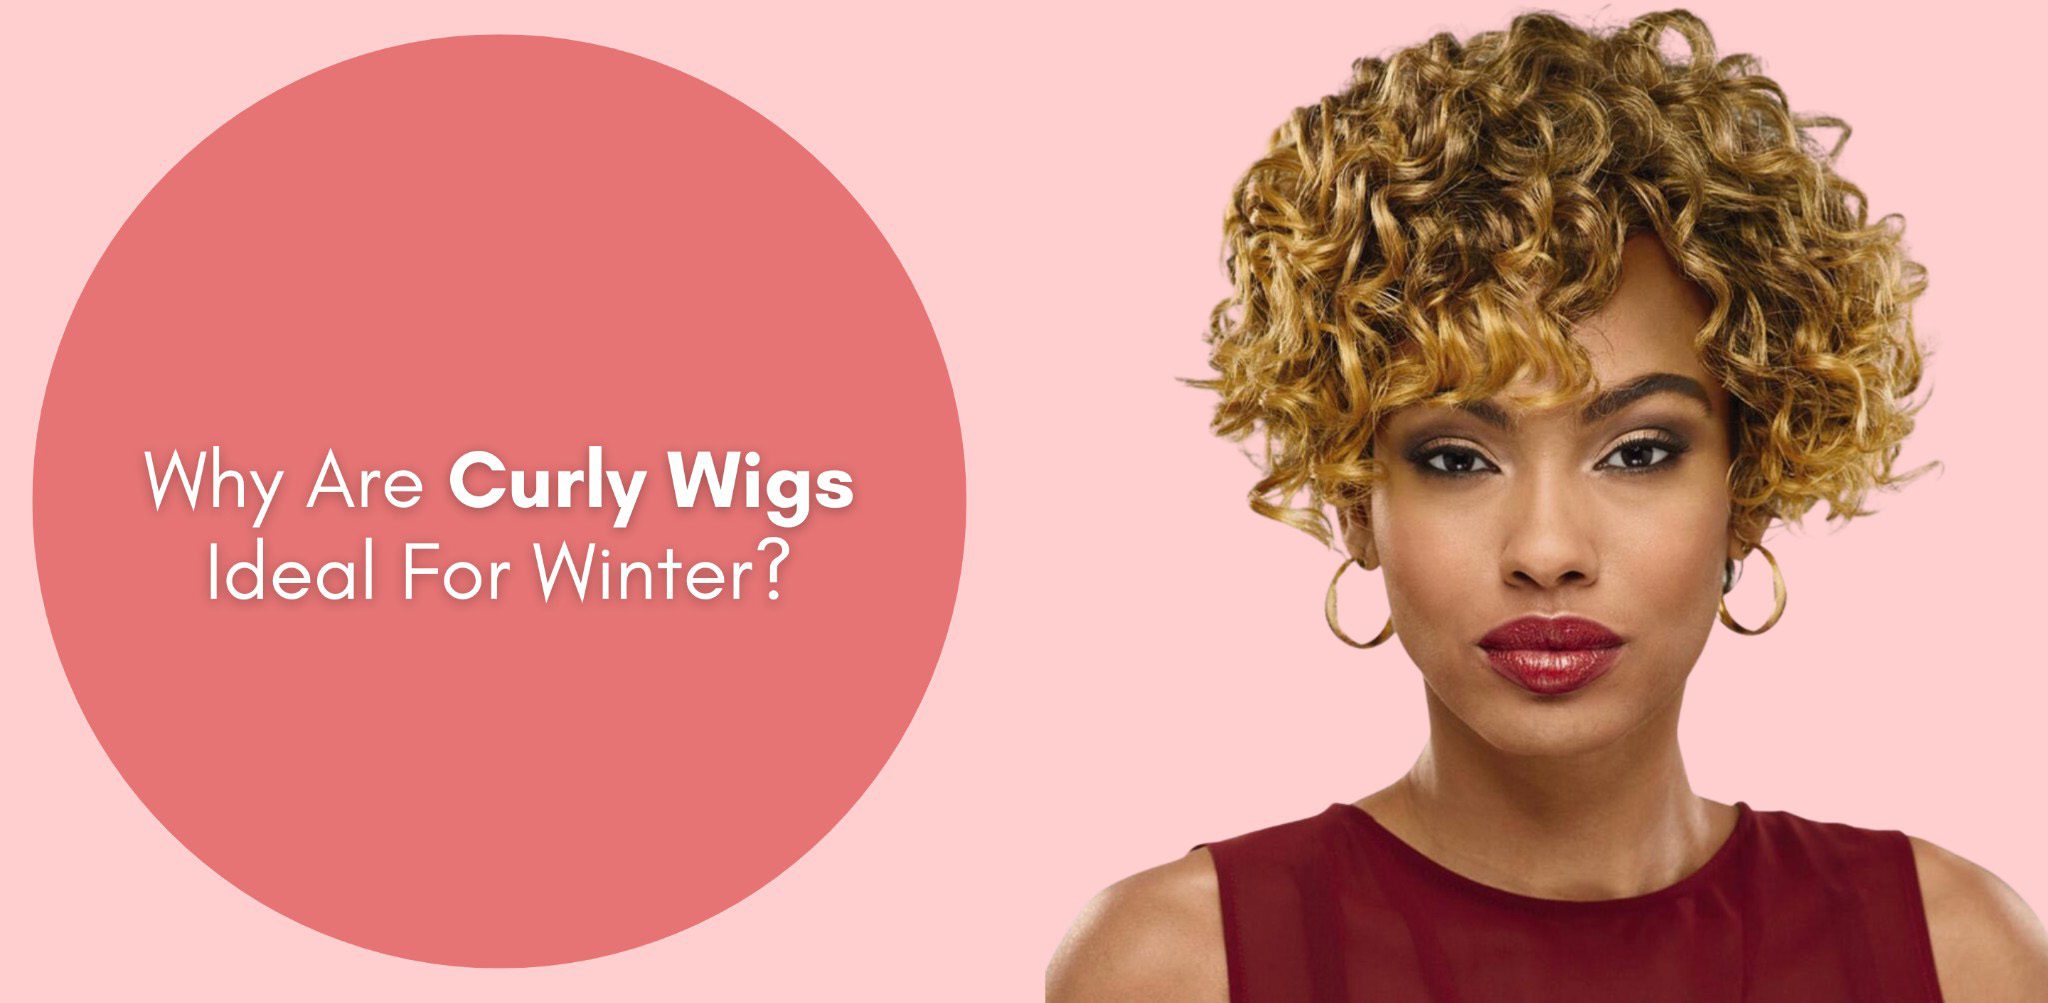 Why Are Curly Wigs Ideal For Winter?